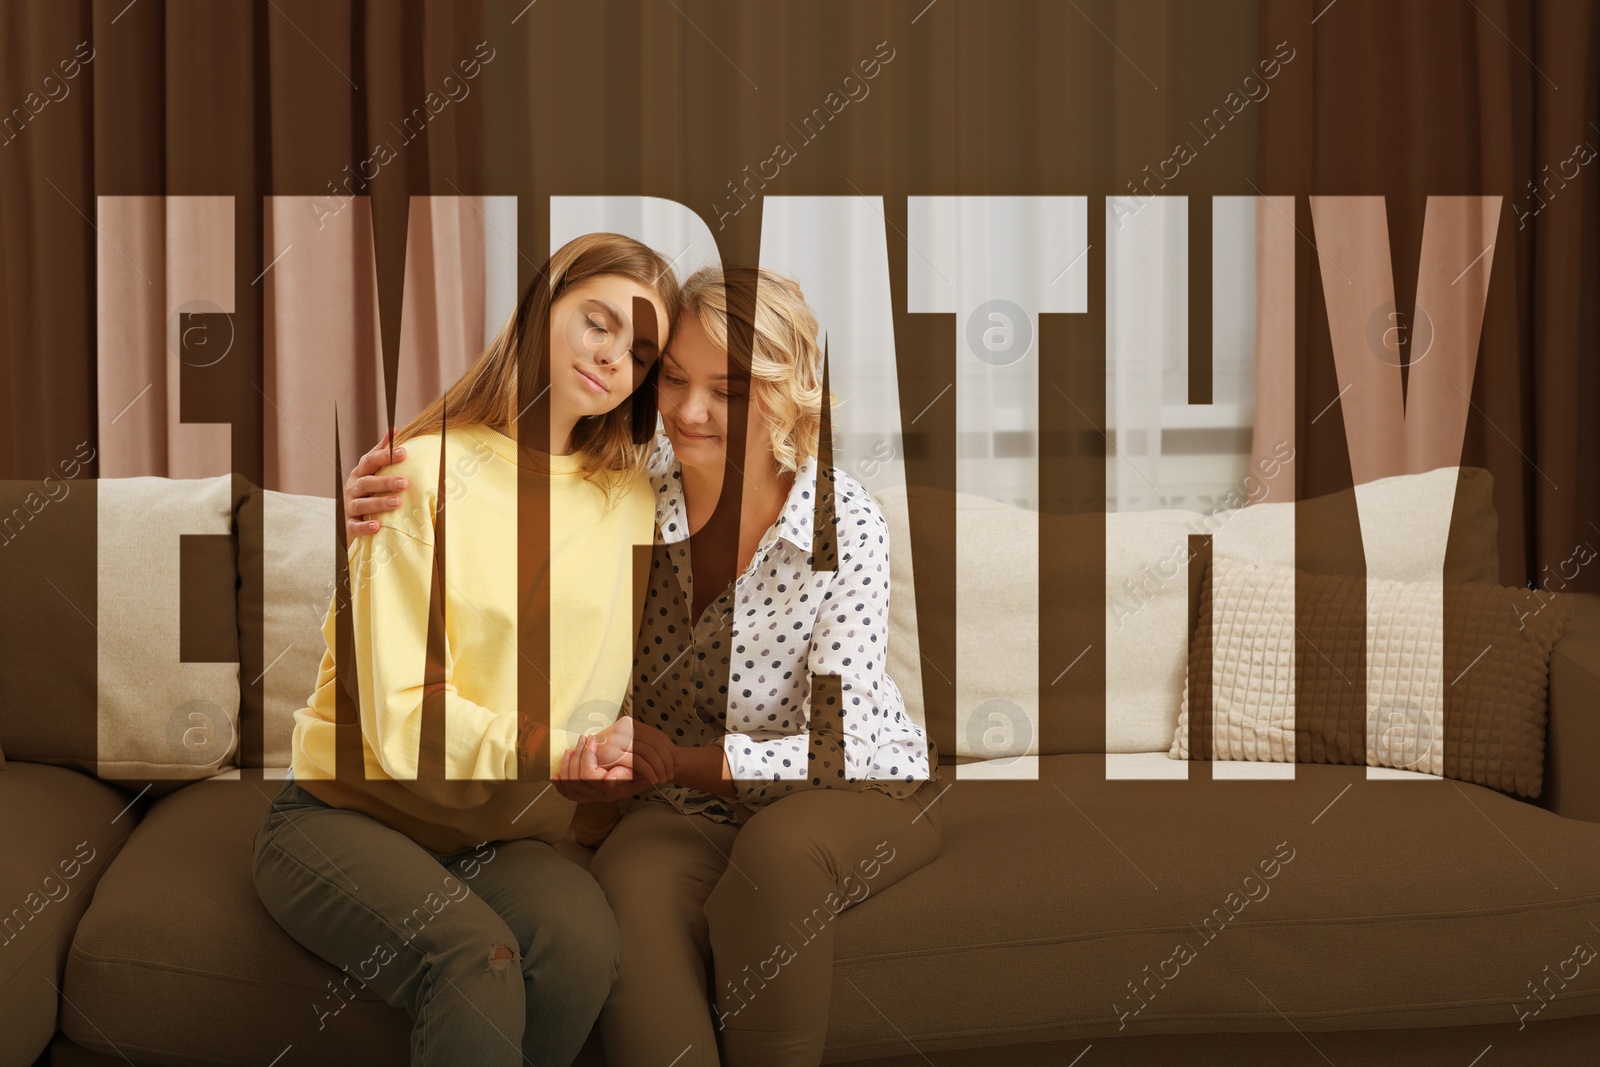 Image of Emotional support. Mother hugging her daughter indoors, view through word Empathy